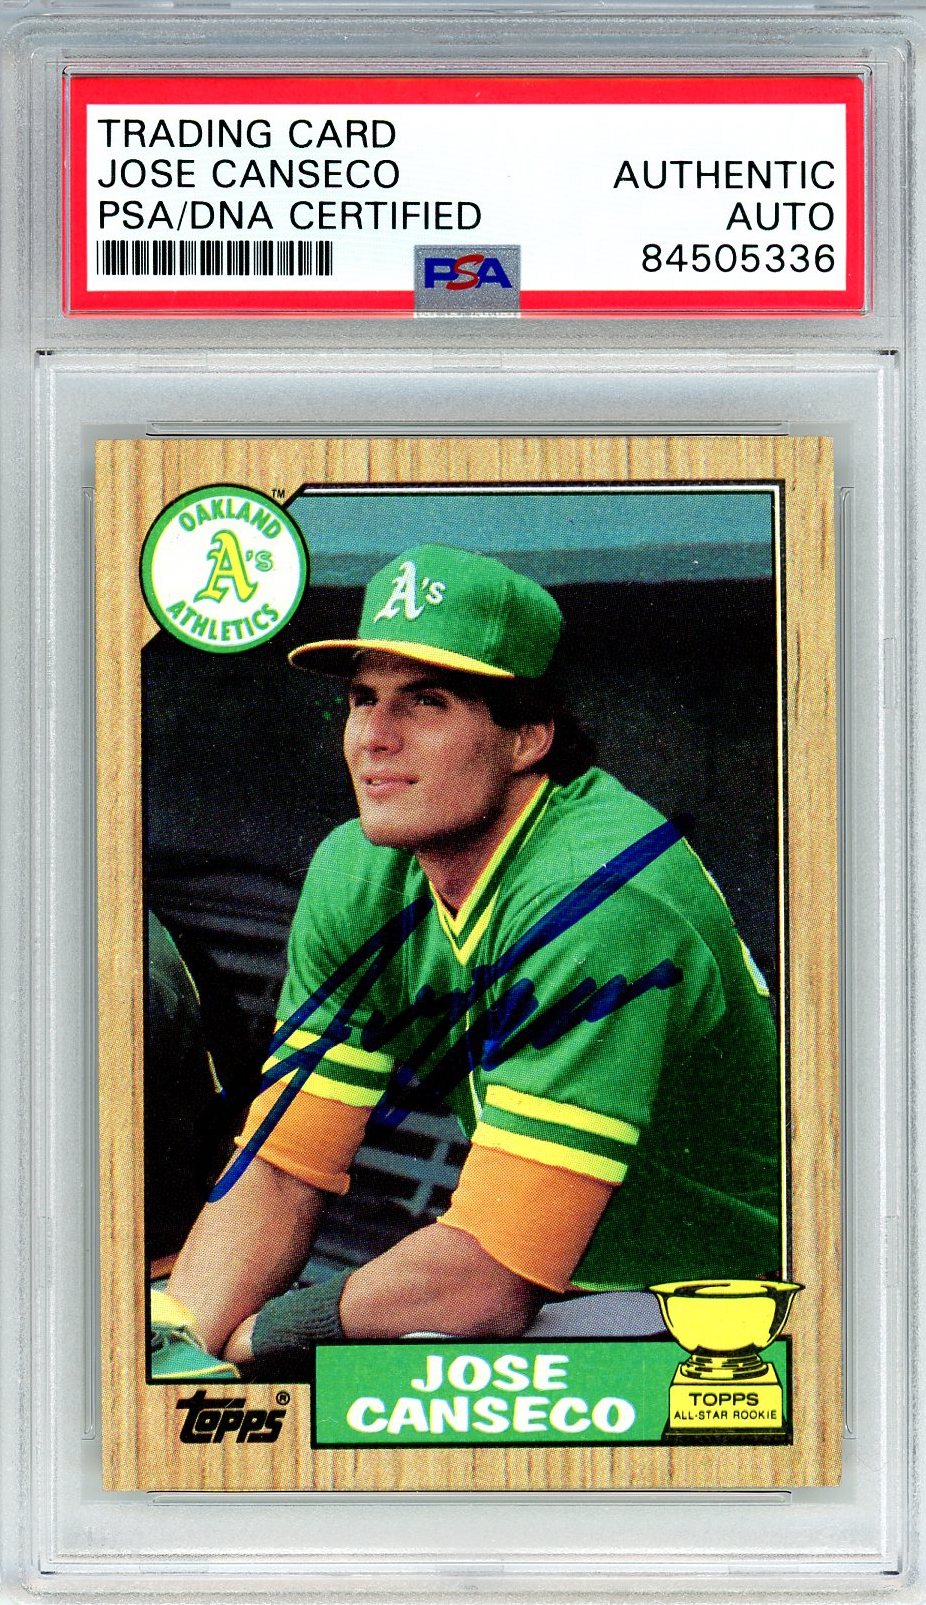 1987 TOPPS JOSE CANSECO AUTO RC ROOKIE #620 PSA DNA (336)